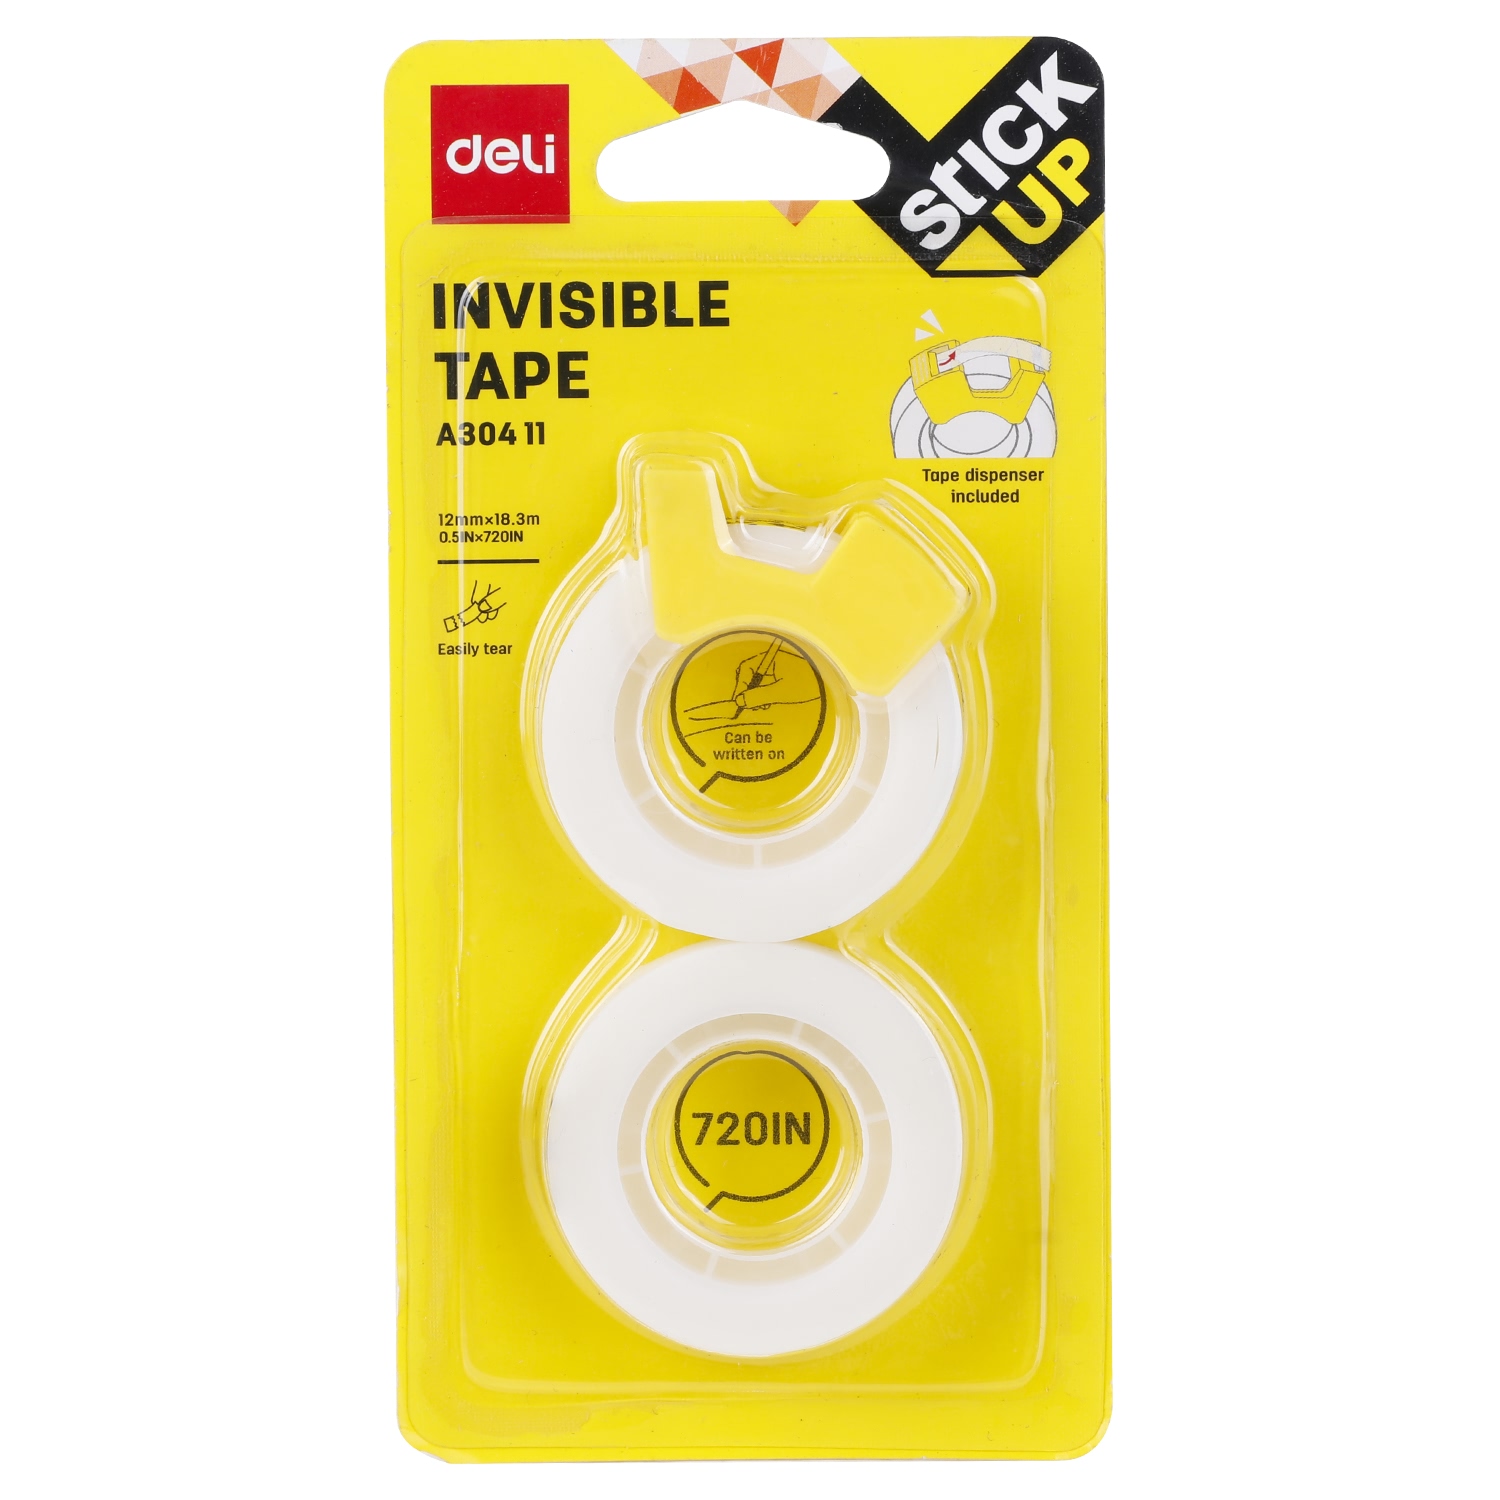 DELI EA30411 Invisible Tape Easy cutting non toxic strong adhesive formula office school tapes